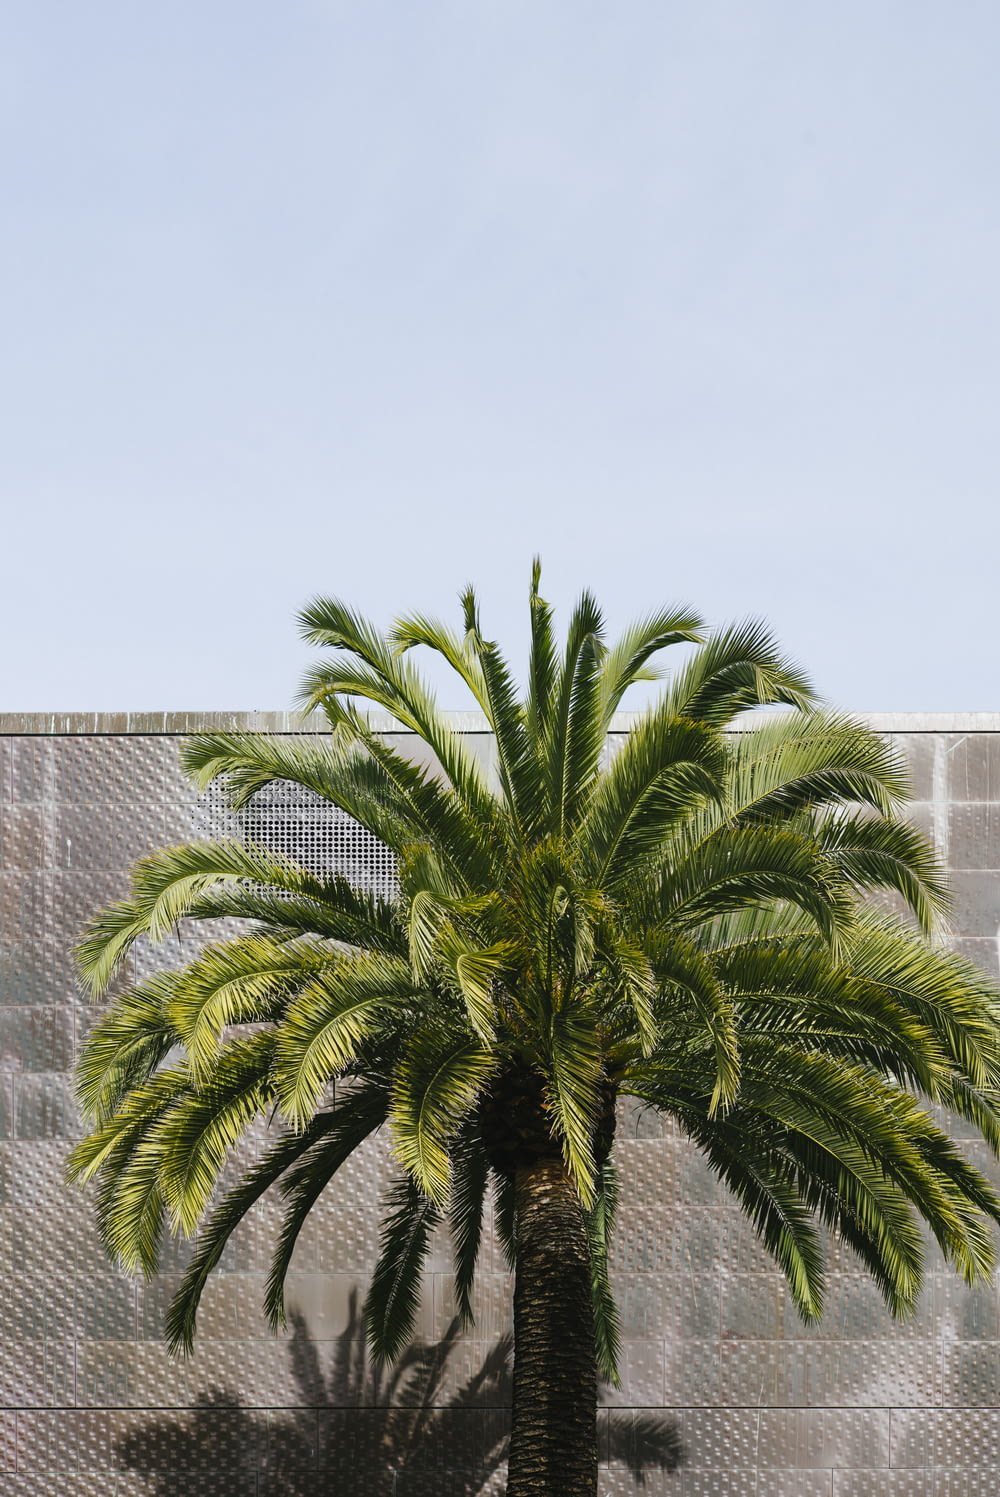 green palm tree beside brown wall at daytime